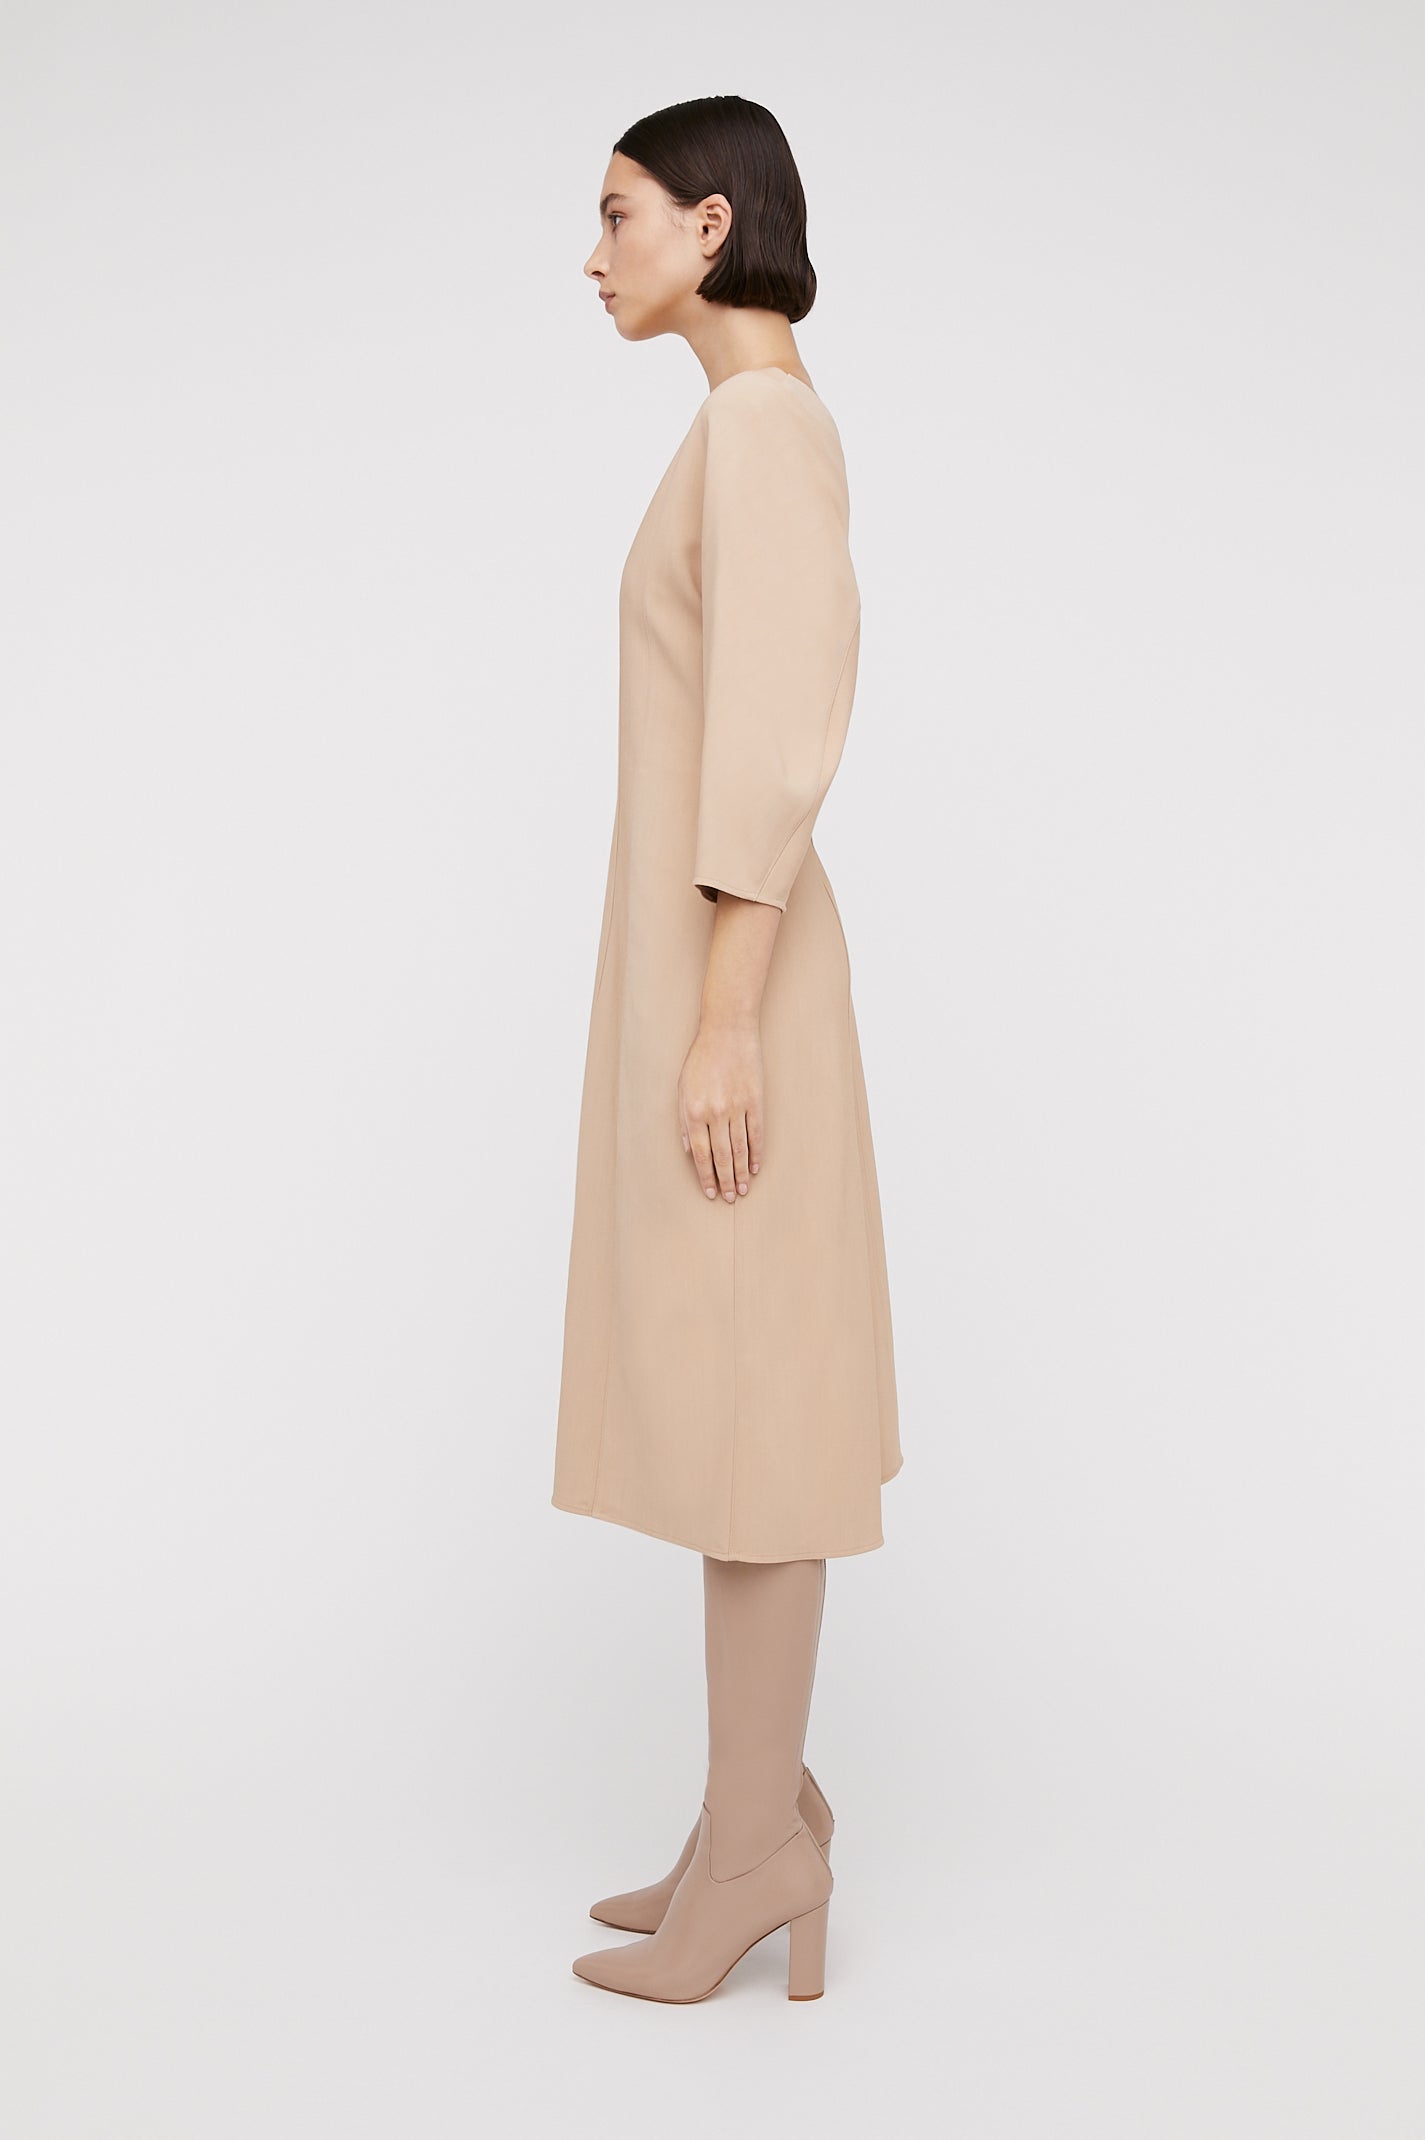 TAILORED COCOON SLEEVE L DRESS - CAPPUCCINO - Scanlan Theodore